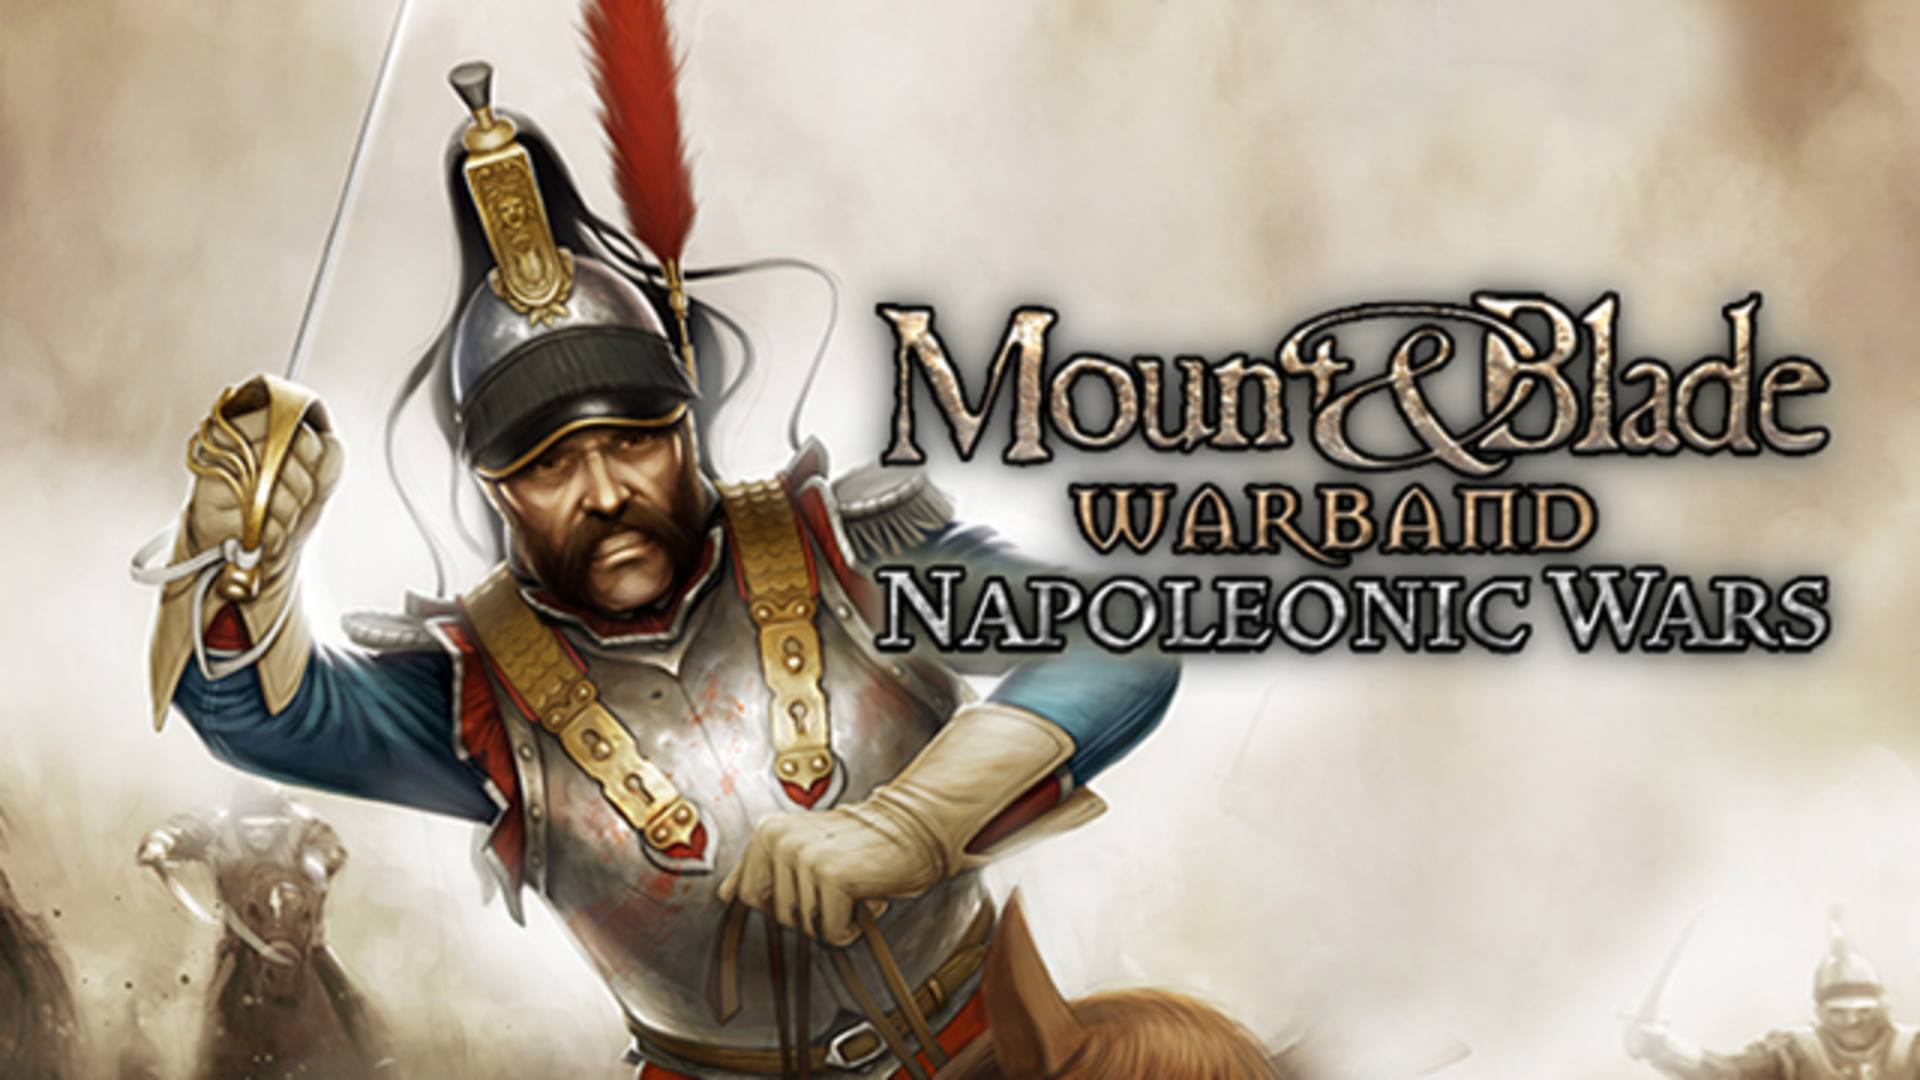 mount and blade viking conquest reforged edition